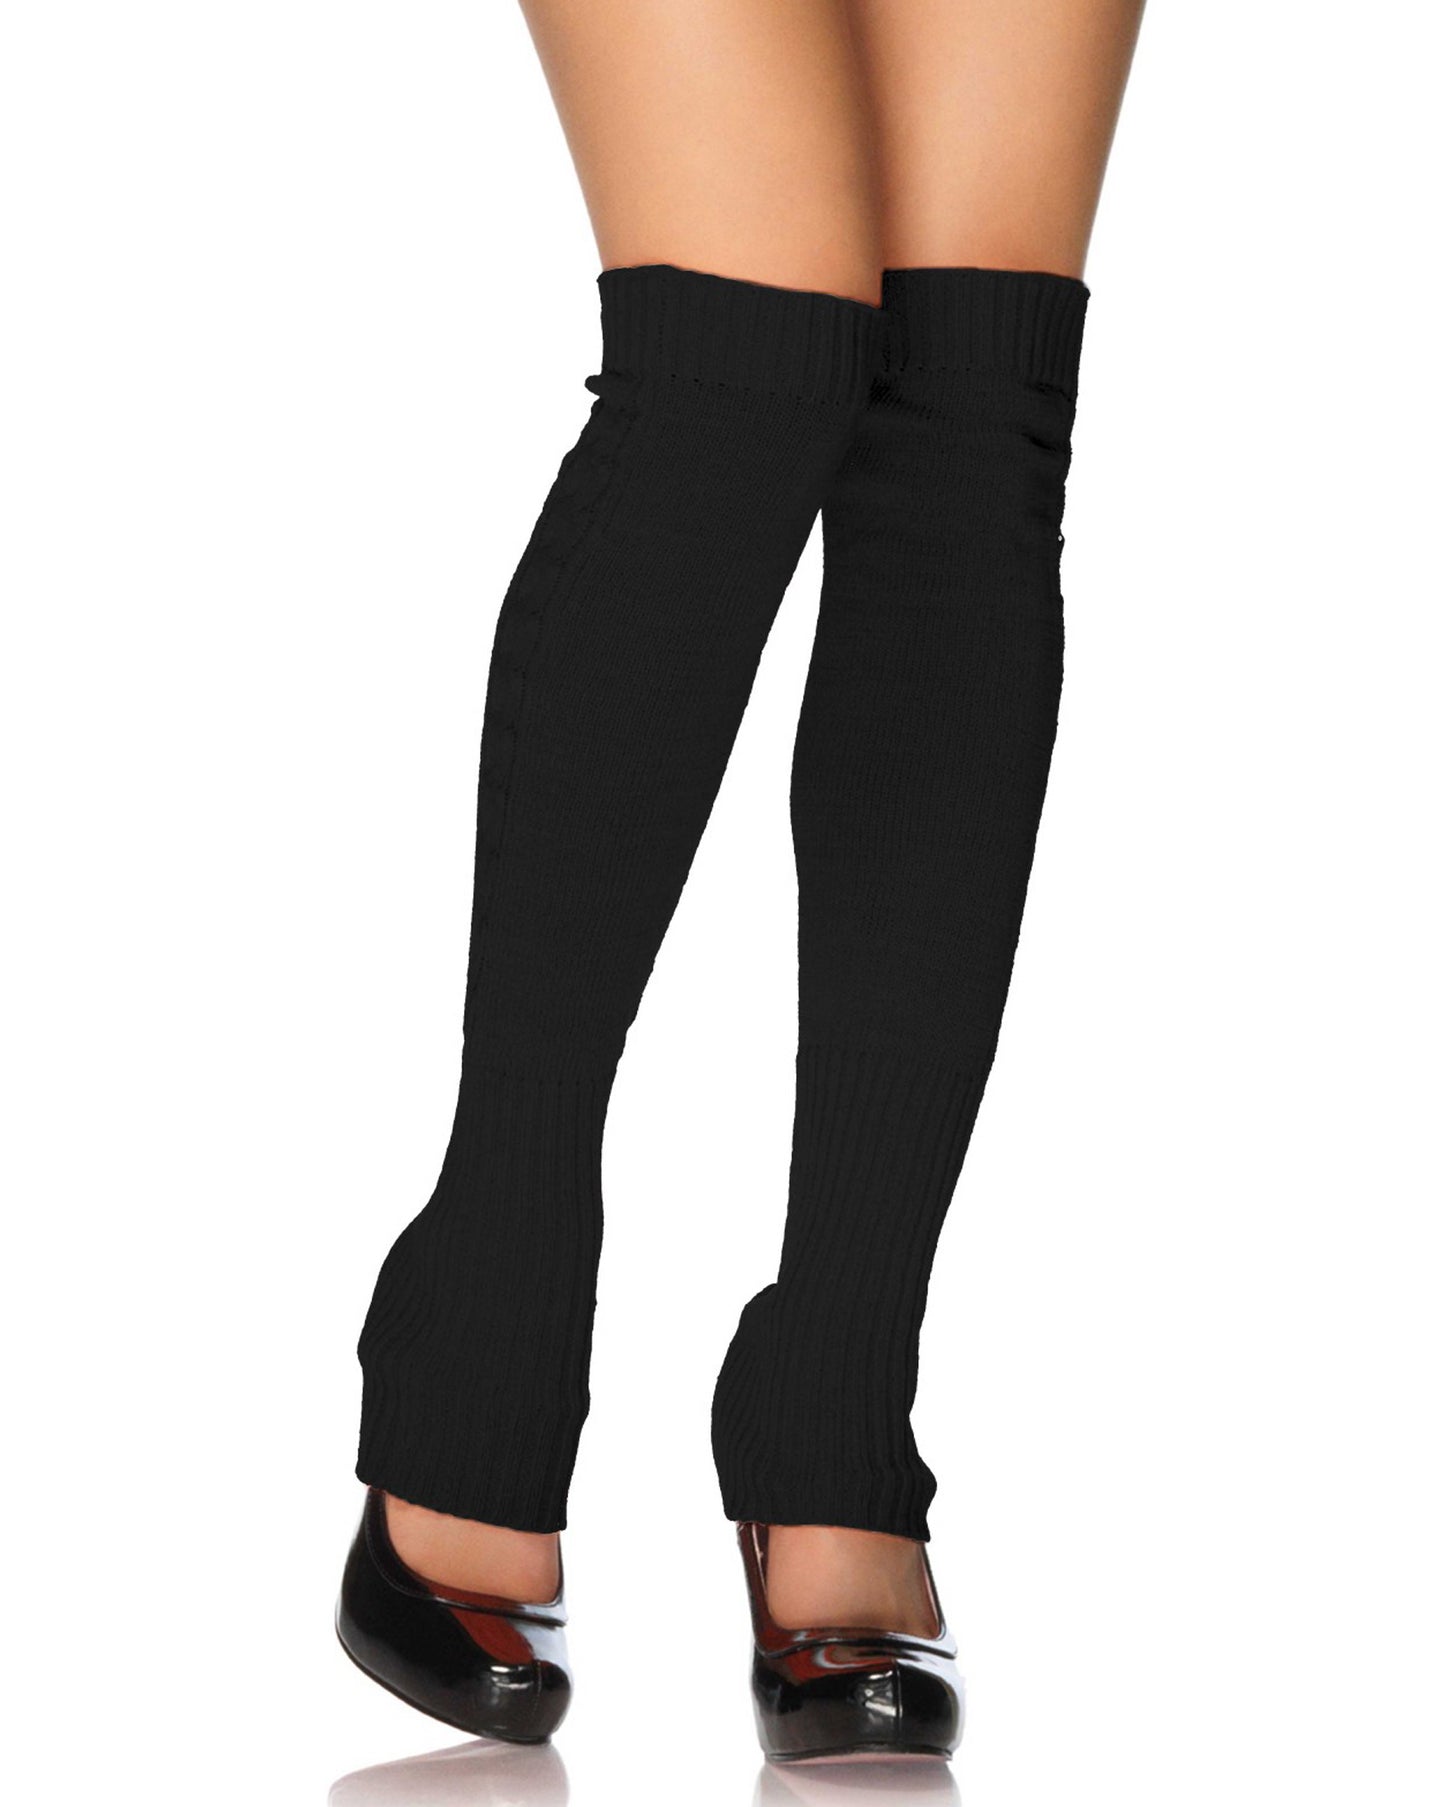 Leg Avenue 3913 Leg Warmers - Extra long over the knee black ribbed knitted leg warmer.